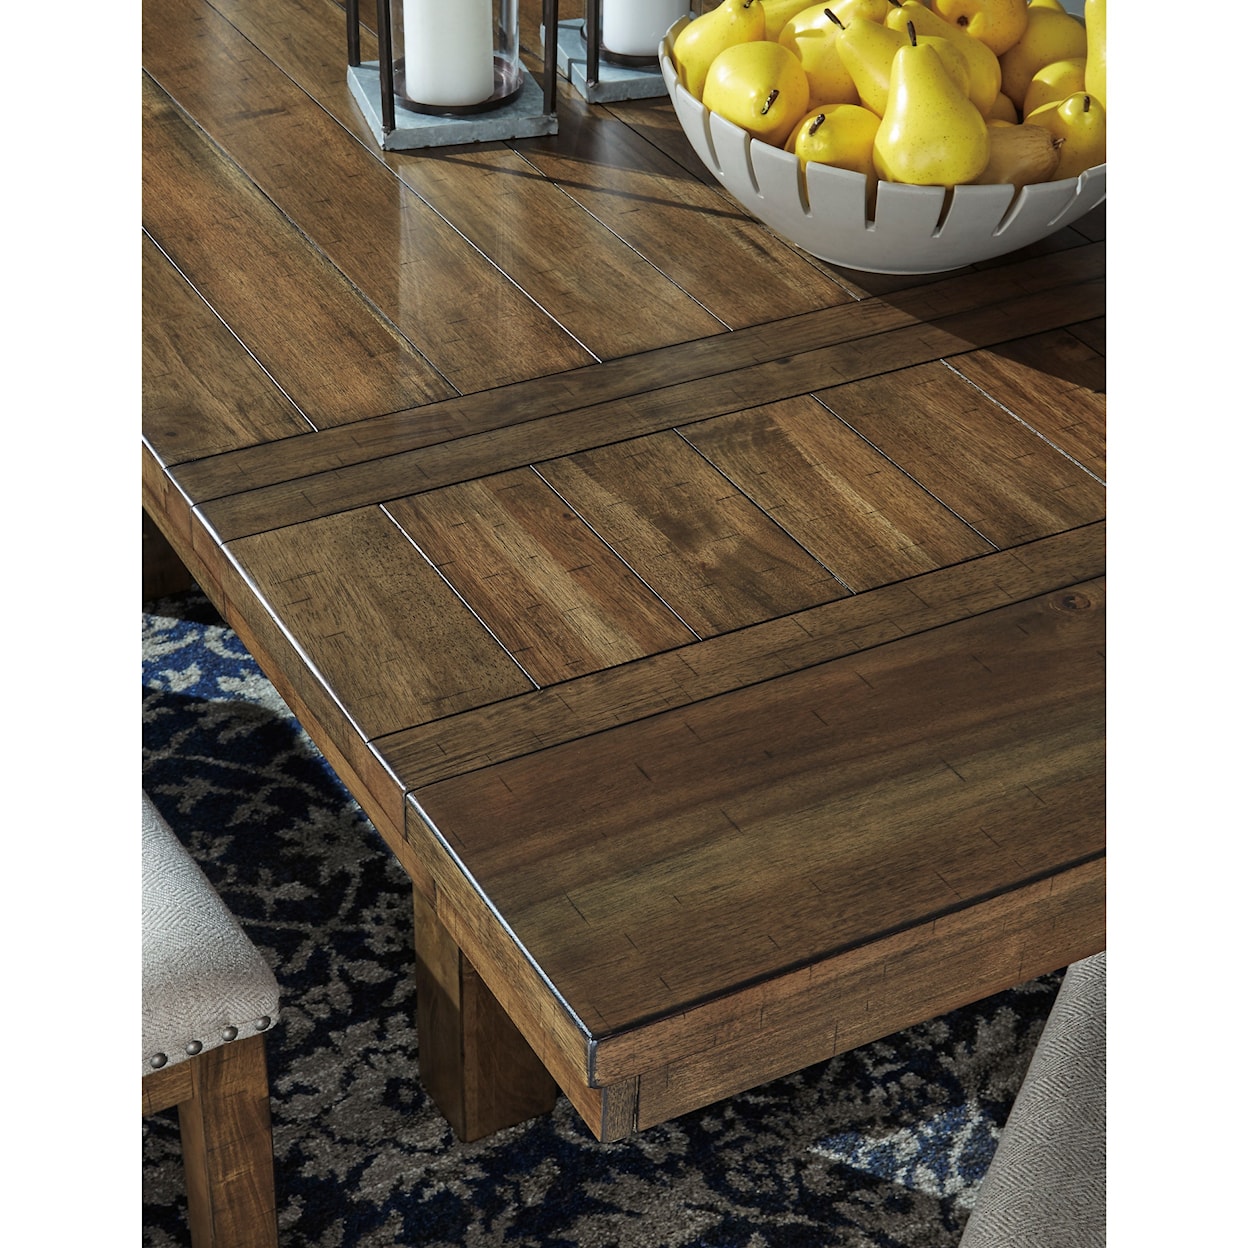 Signature Design by Ashley Furniture Moriville Rectangular Dining Room Extension Table